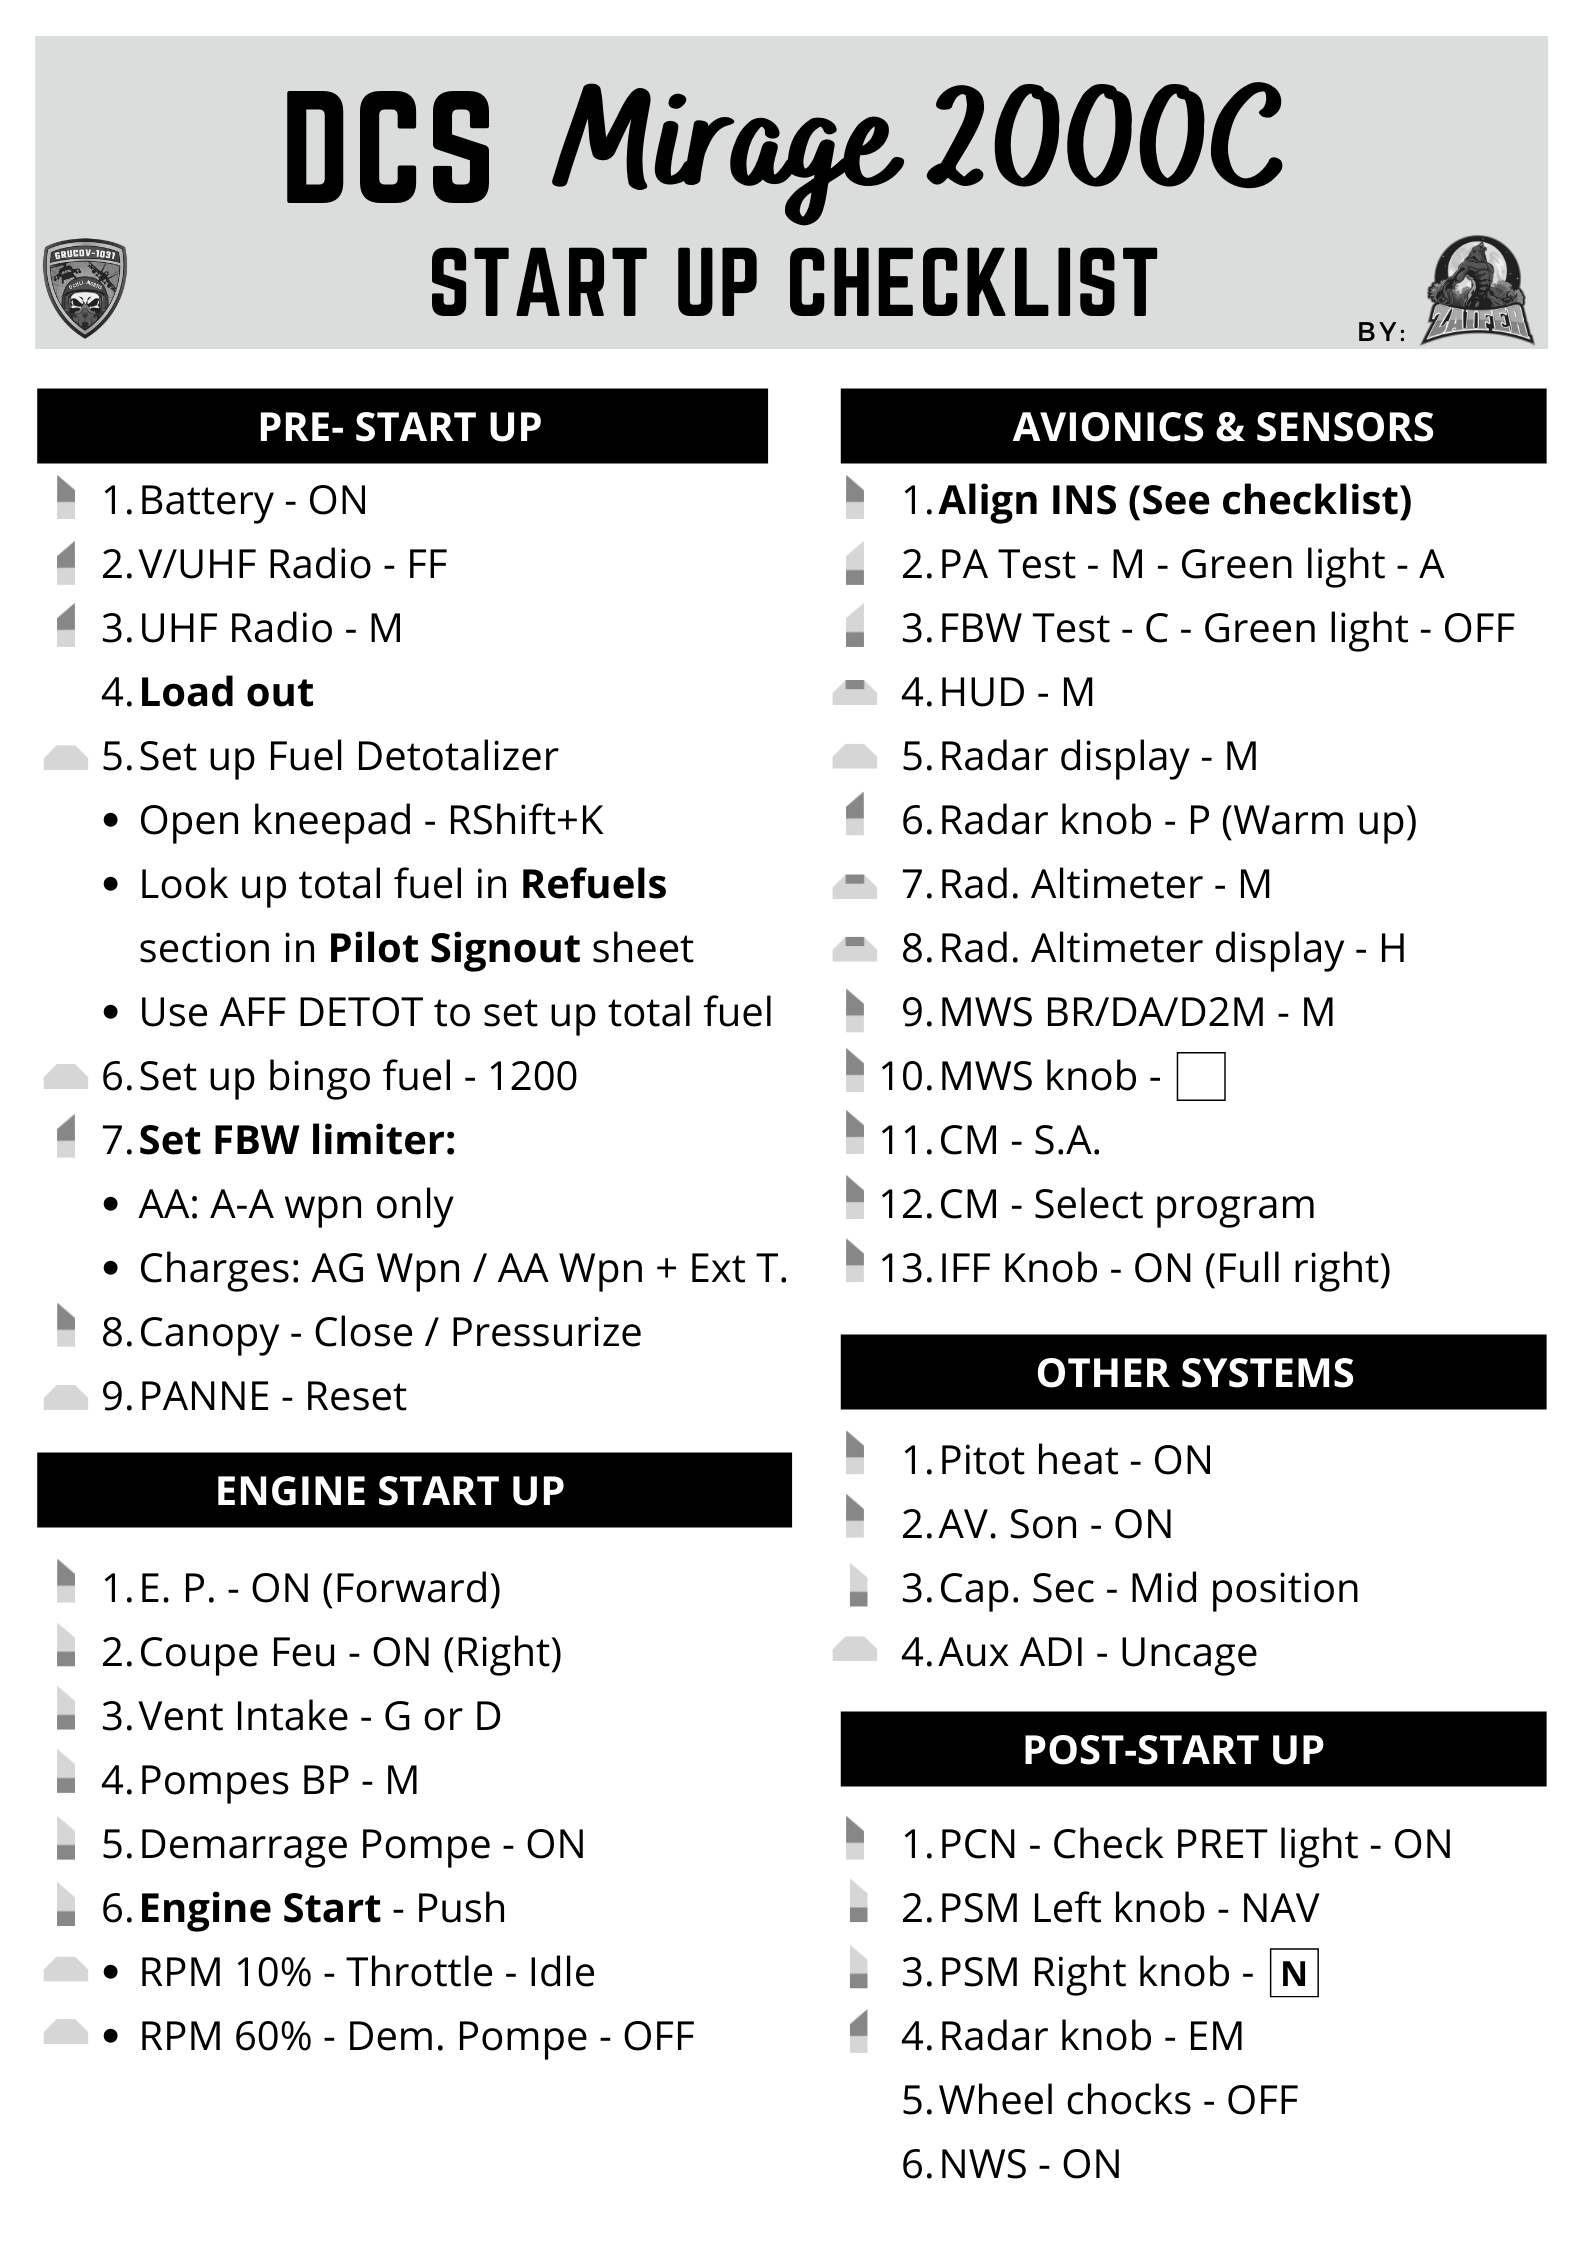 Simplified checklists for Mirage 2000C